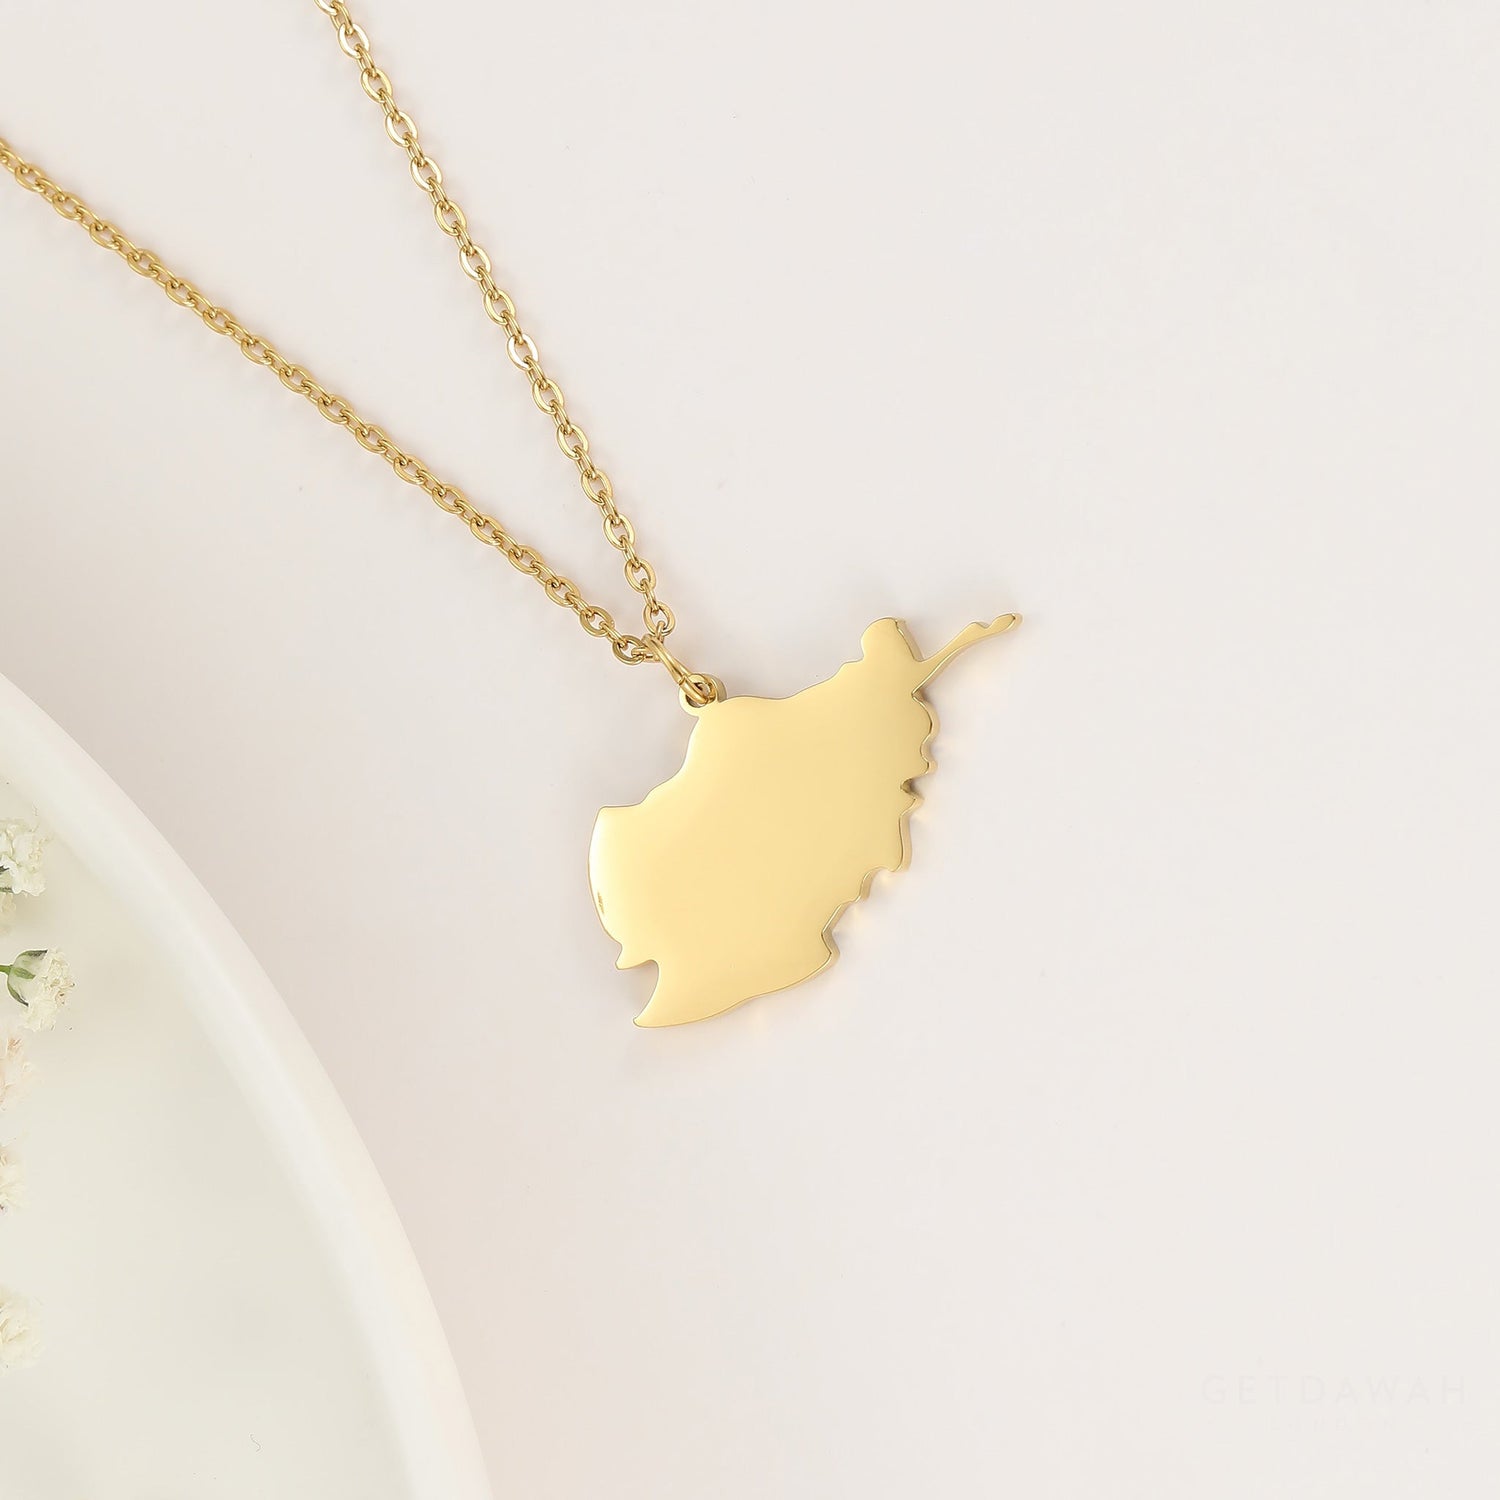 Country Map Necklaces